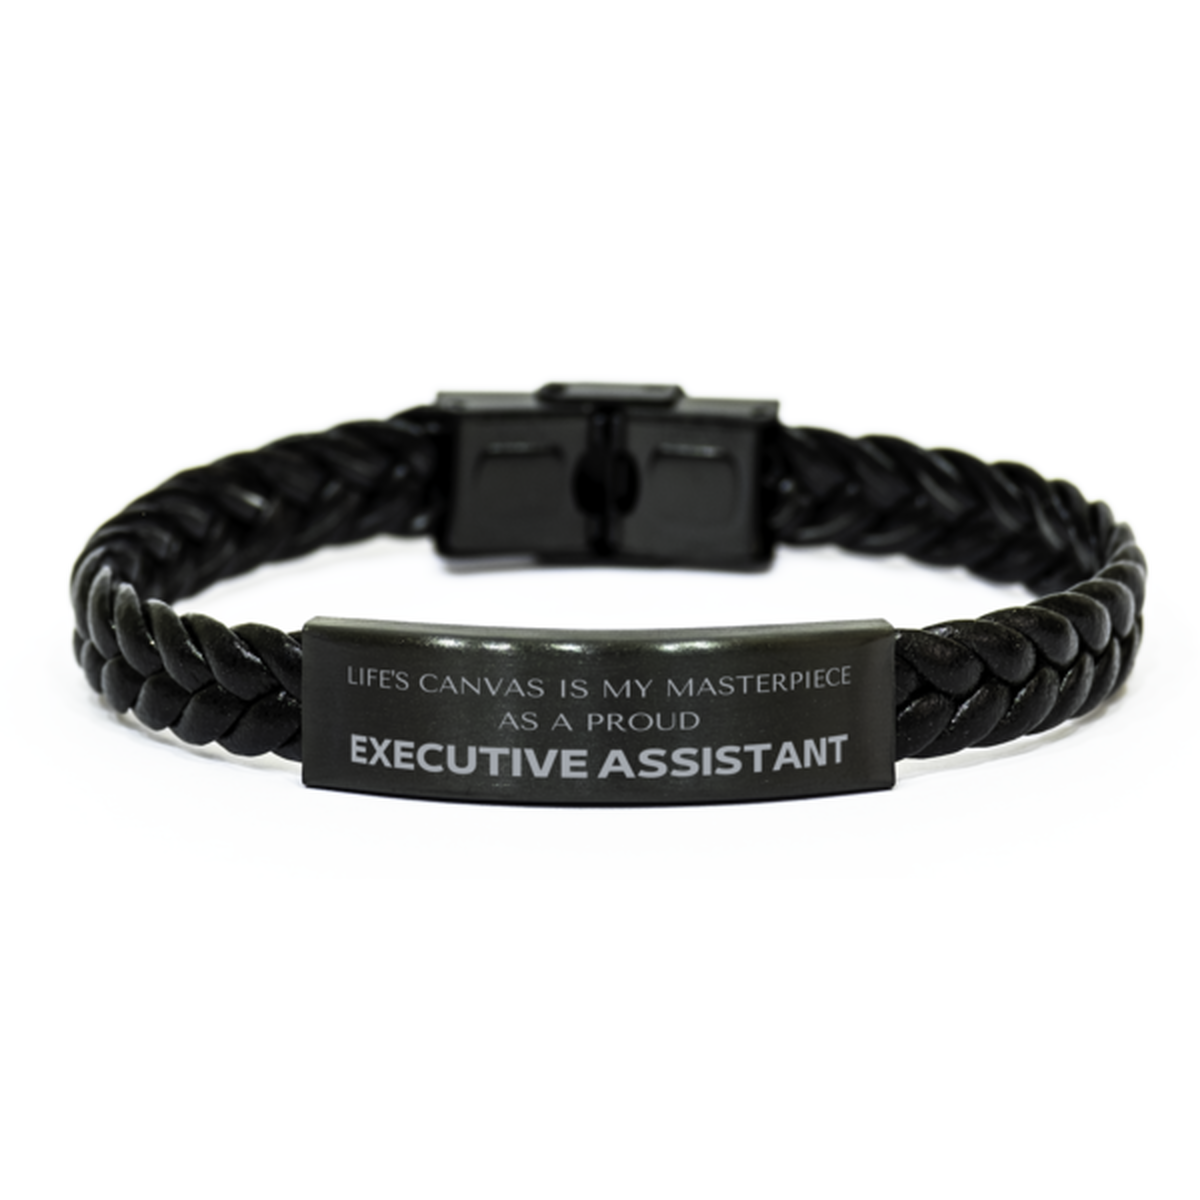 Proud Executive Assistant Gifts, Life's canvas is my masterpiece, Epic Birthday Christmas Unique Braided Leather Bracelet For Executive Assistant, Coworkers, Men, Women, Friends